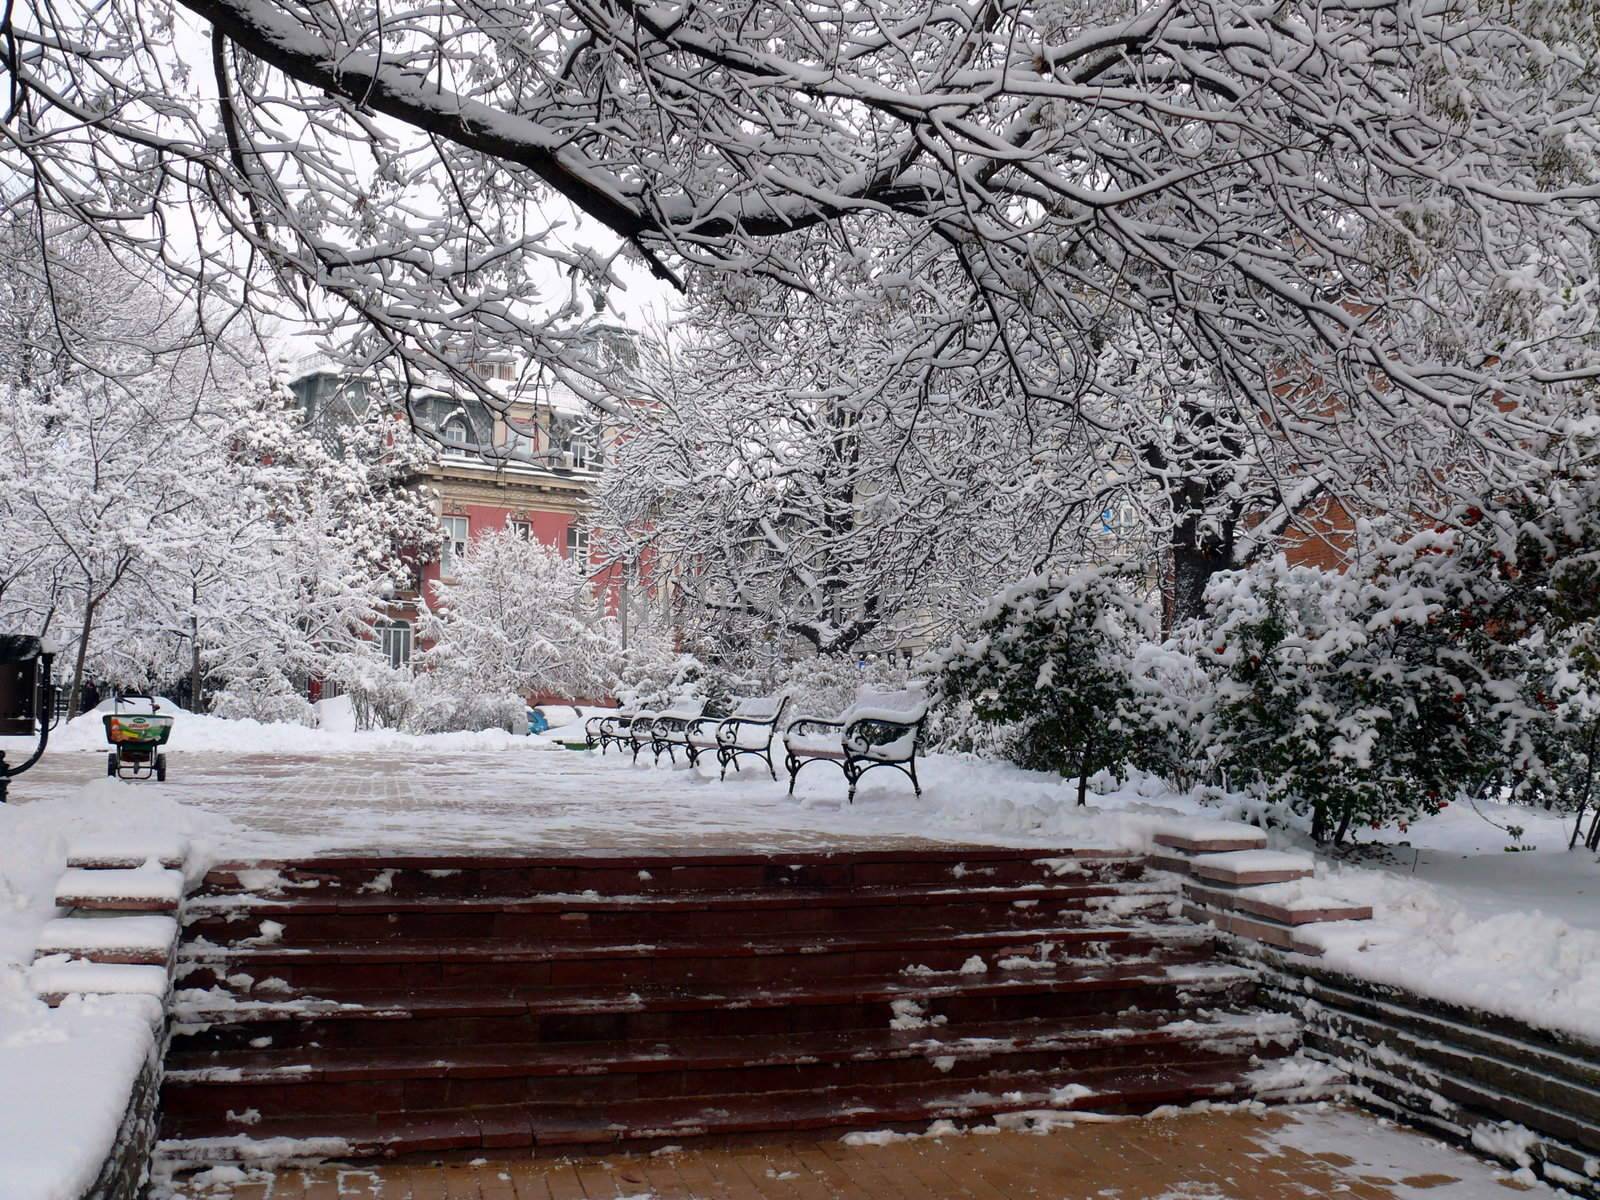 Benches with snow in Sofia, Bulgaria